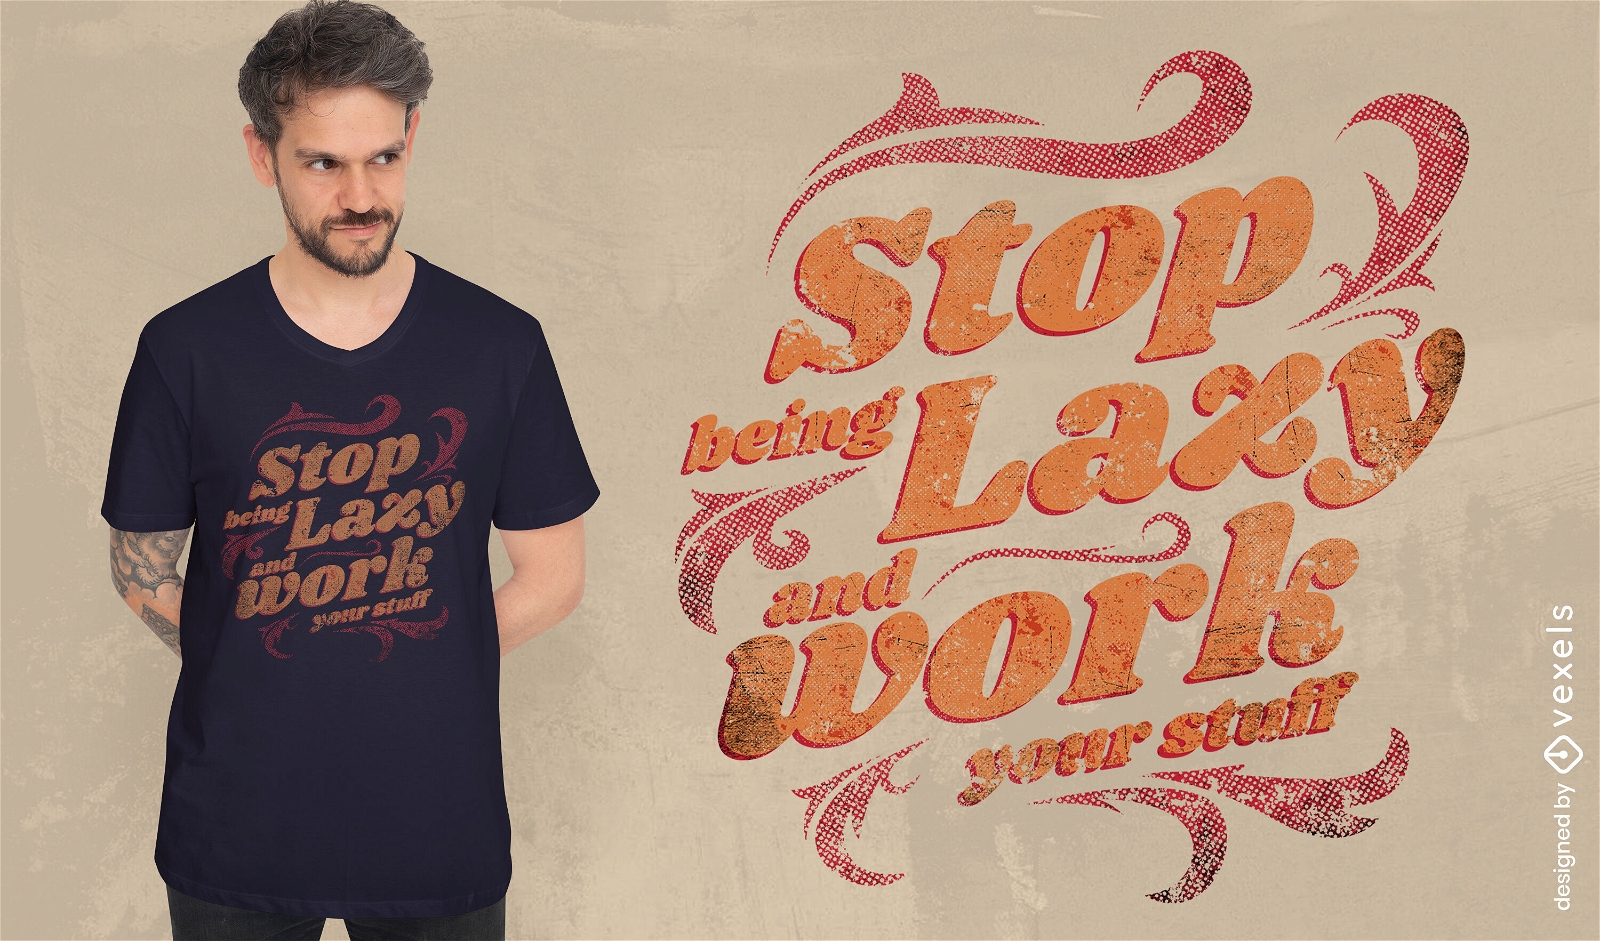 Stop being lazy t-shirt design